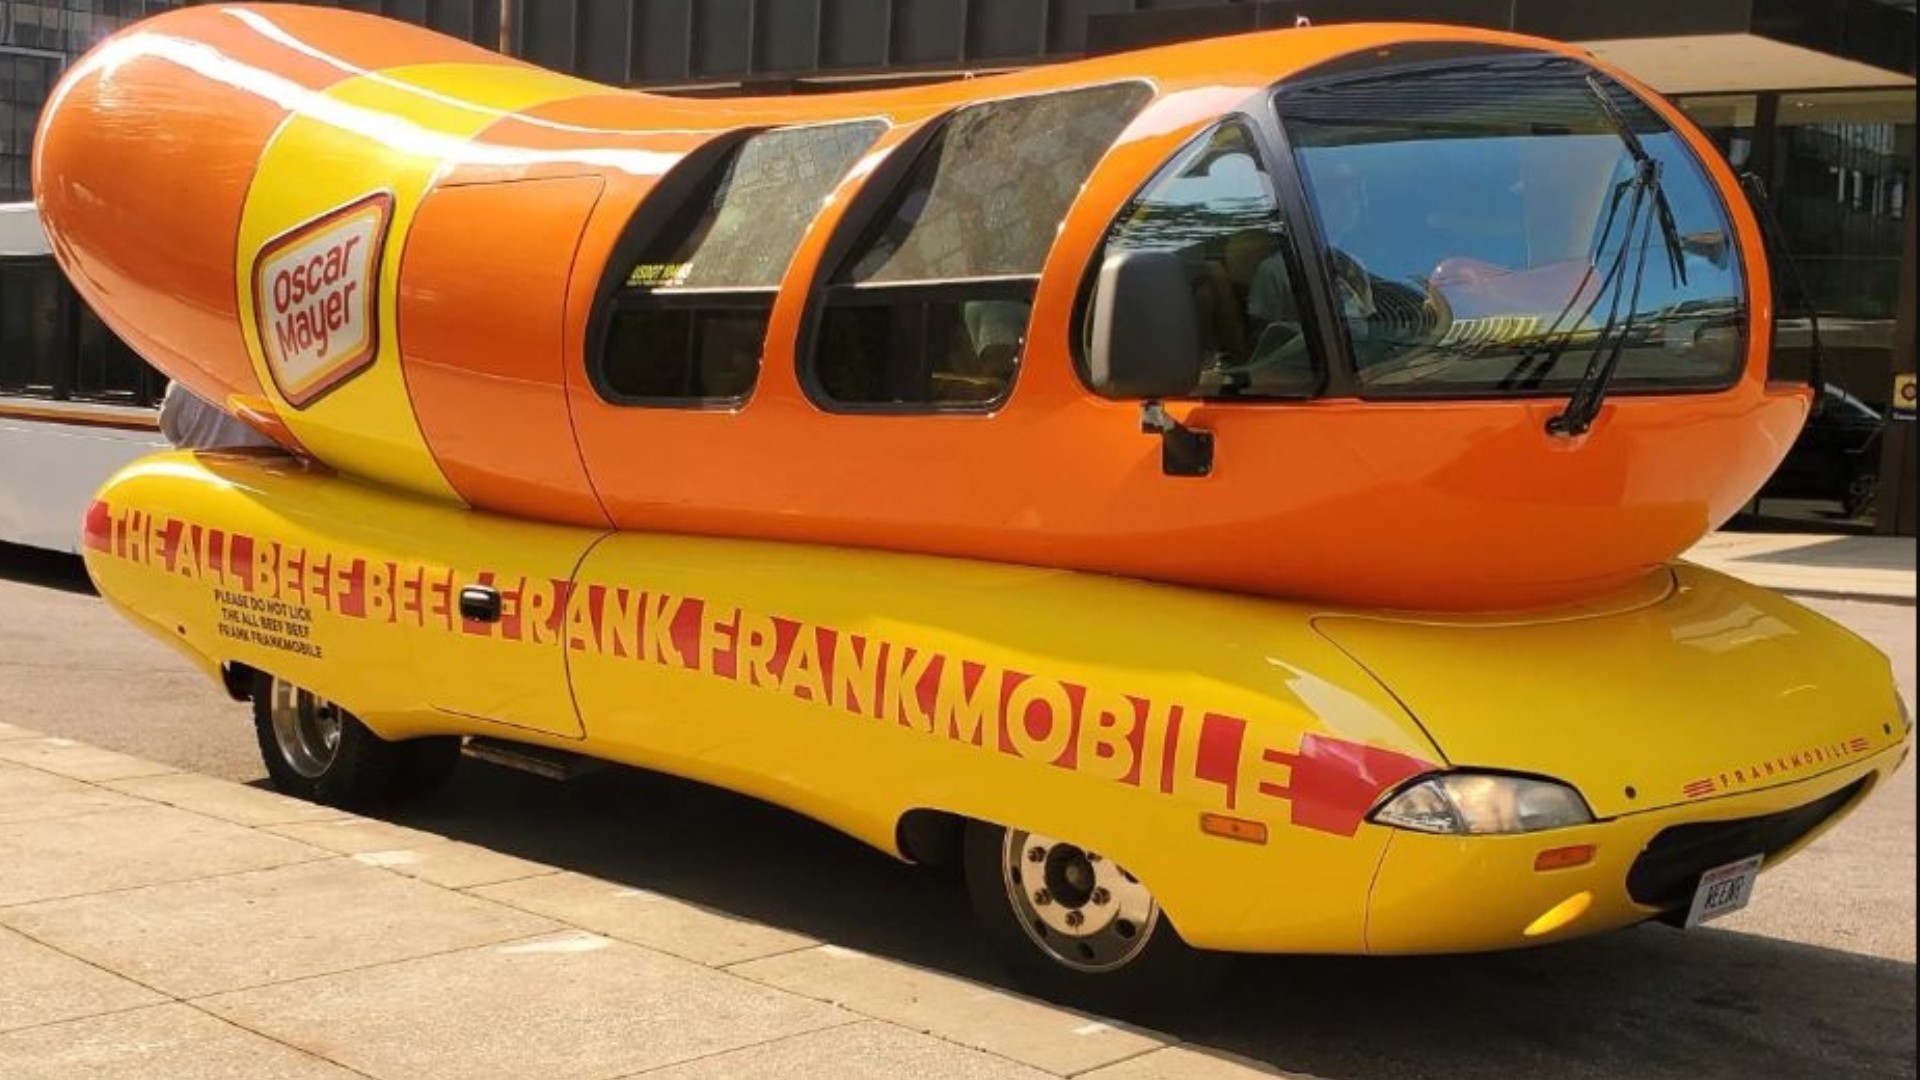 Kristen and Ellen discuss Oscar Mayer's "Frankmobile" coming to DC, Uber teaming up with Waymo, and the Surgeon General's warning of social media.